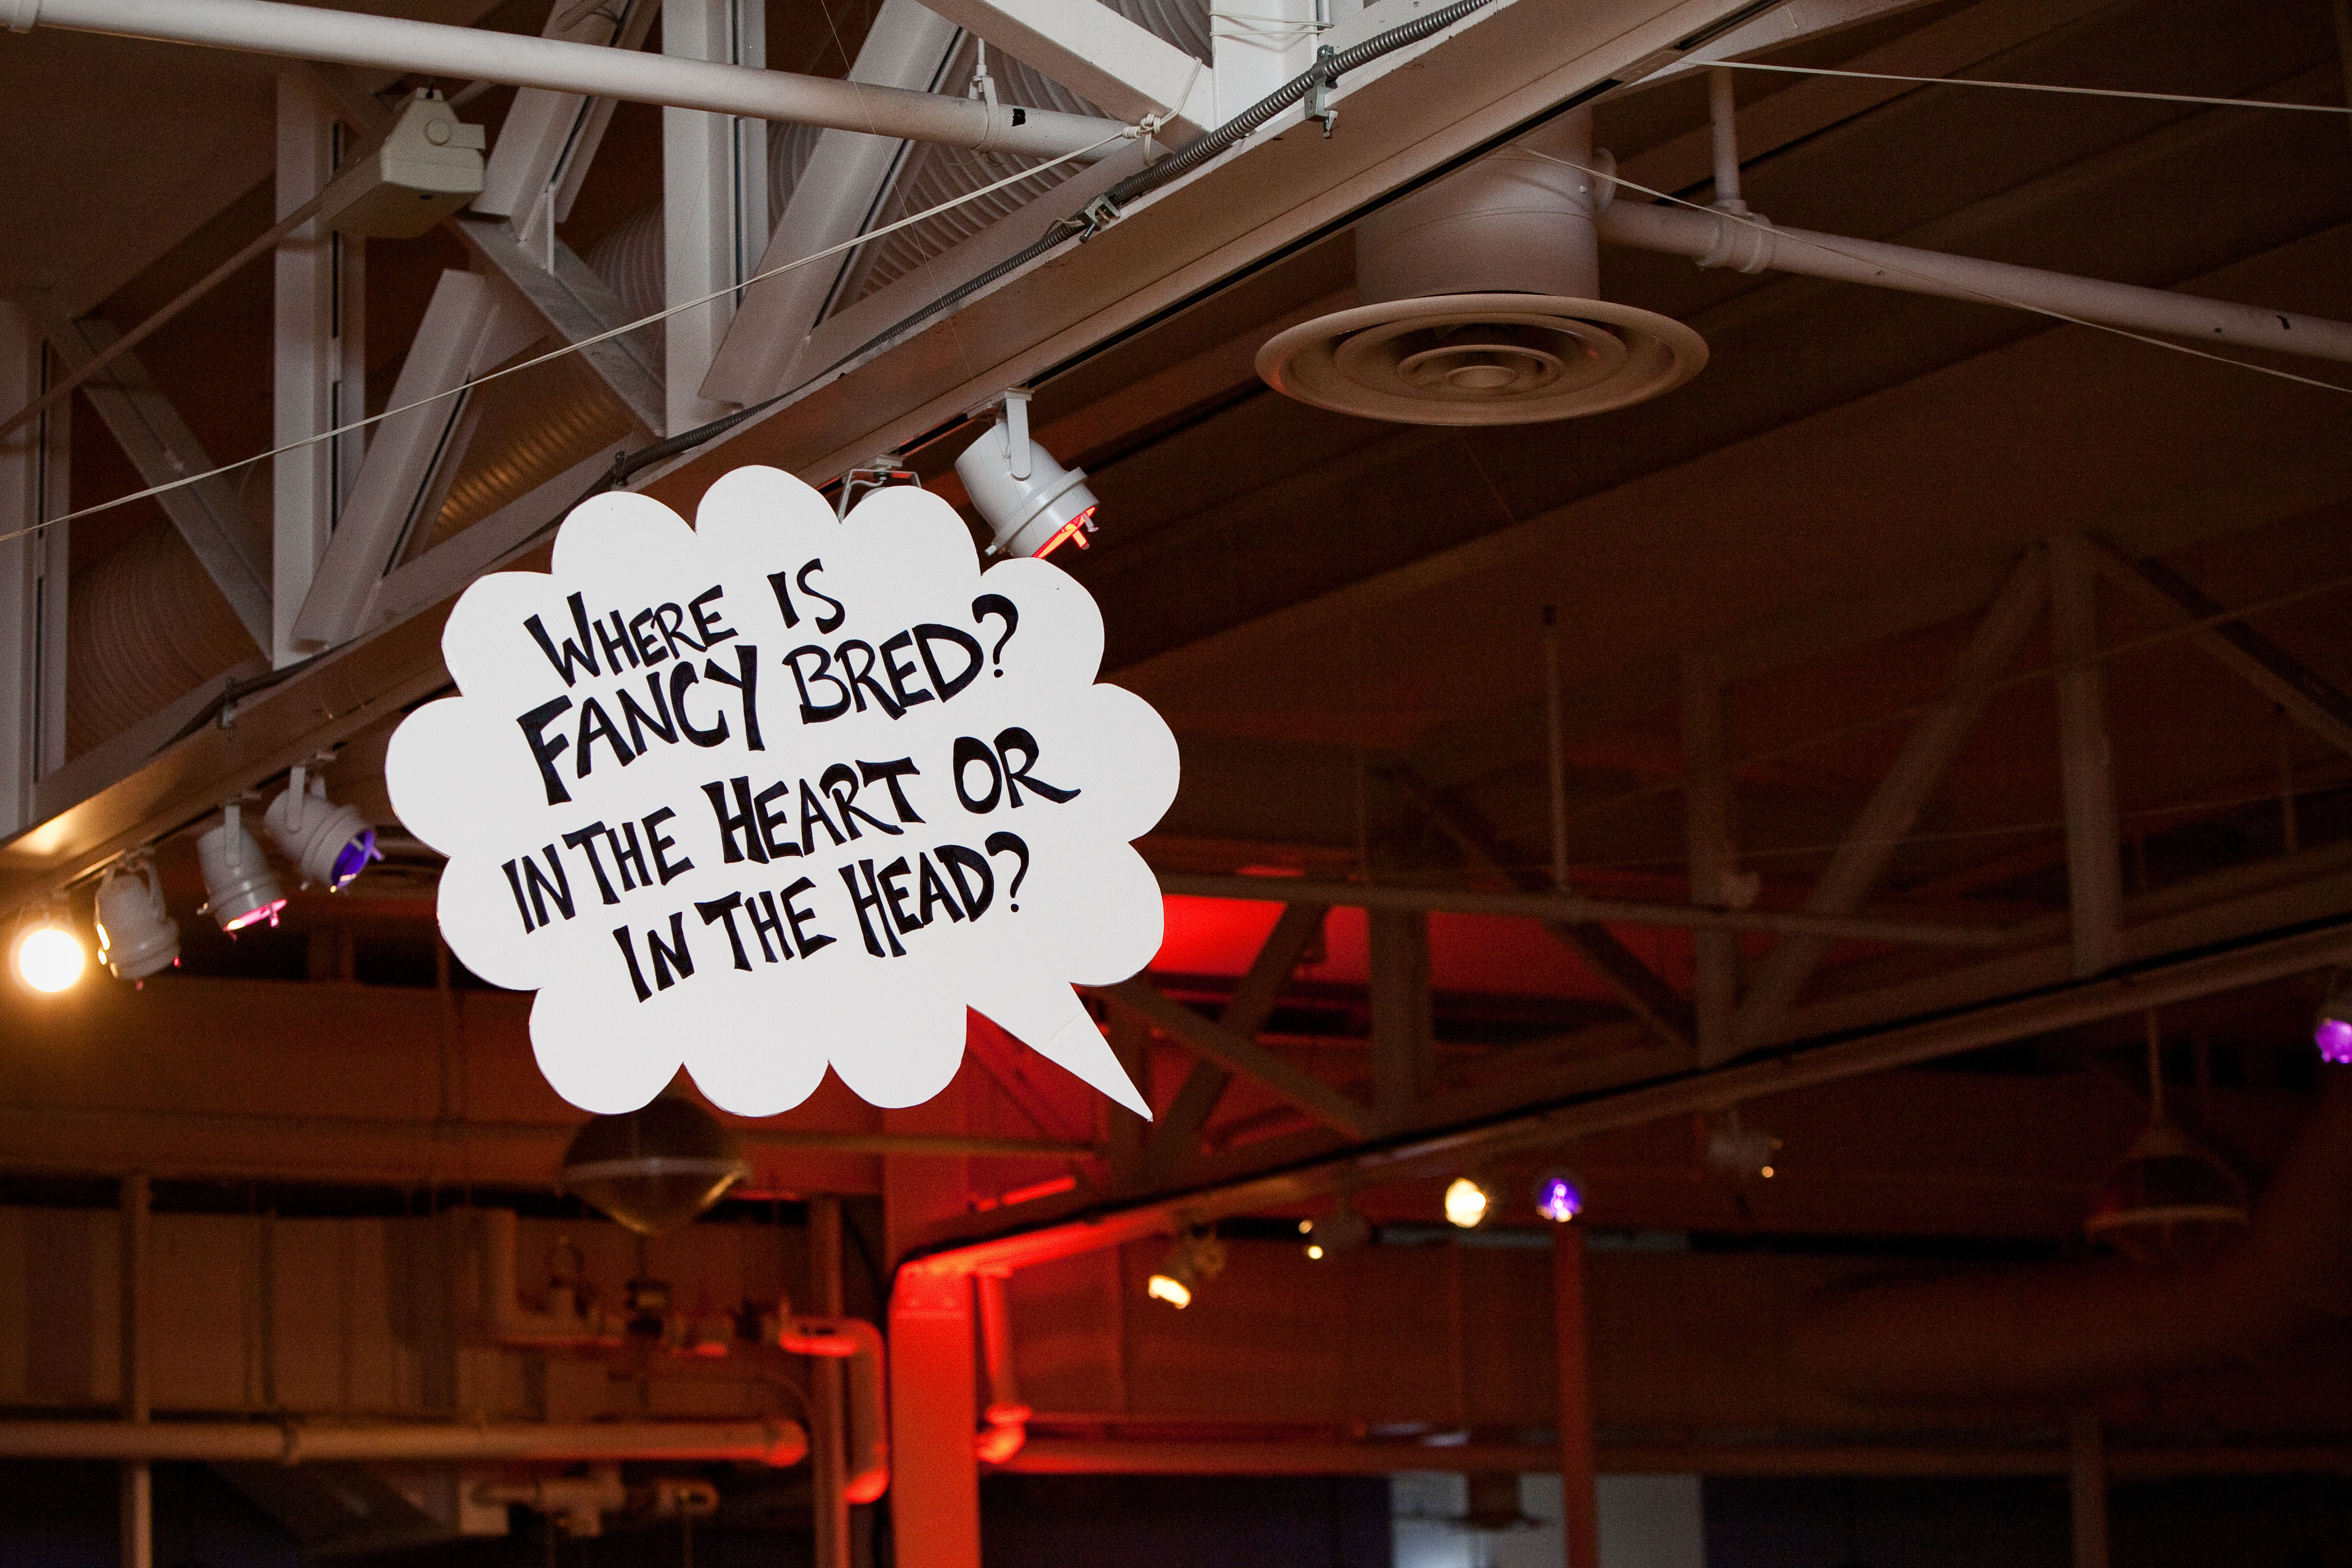 word bubble: where is fancy bred? in the heart or in the head?